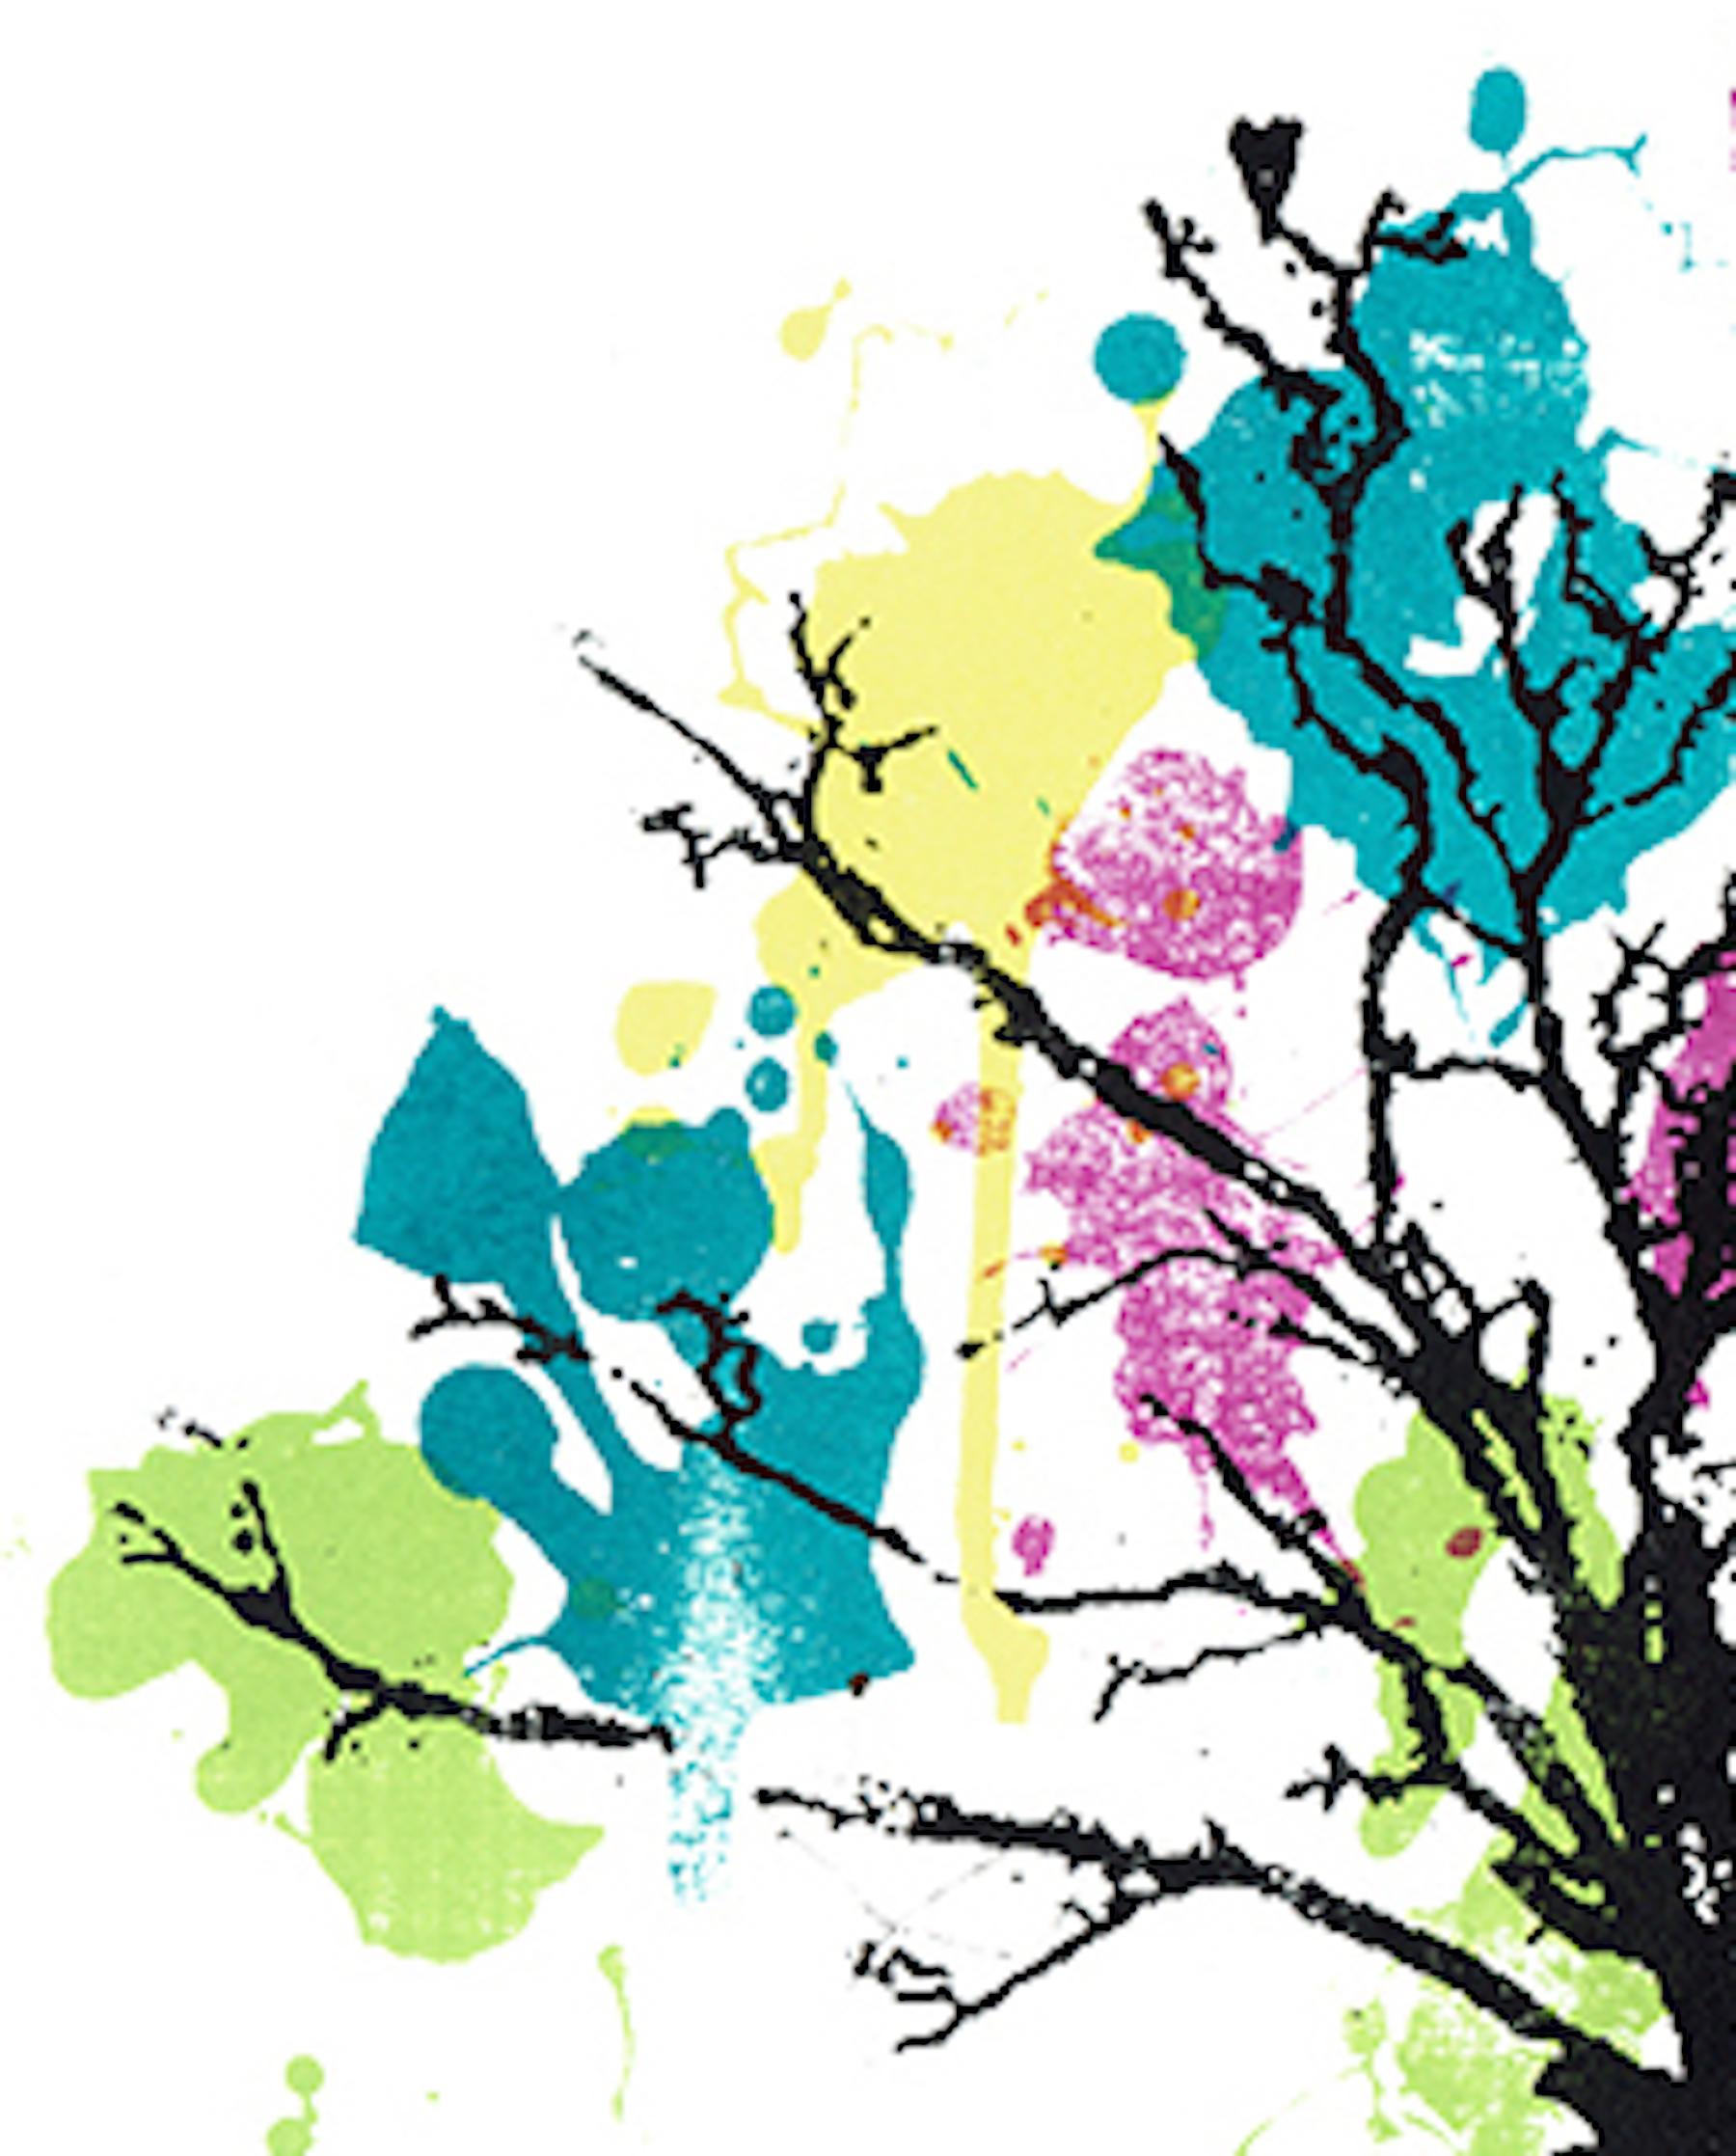 Blooming Colourful’ Original Handmade Silk Screen Print by the illustrator and artist: Katie Edwards.

A fun, colourful and vibrant illustration of a tree with paint splattered flowers. A strong graphic image with symbolic representation of the tree